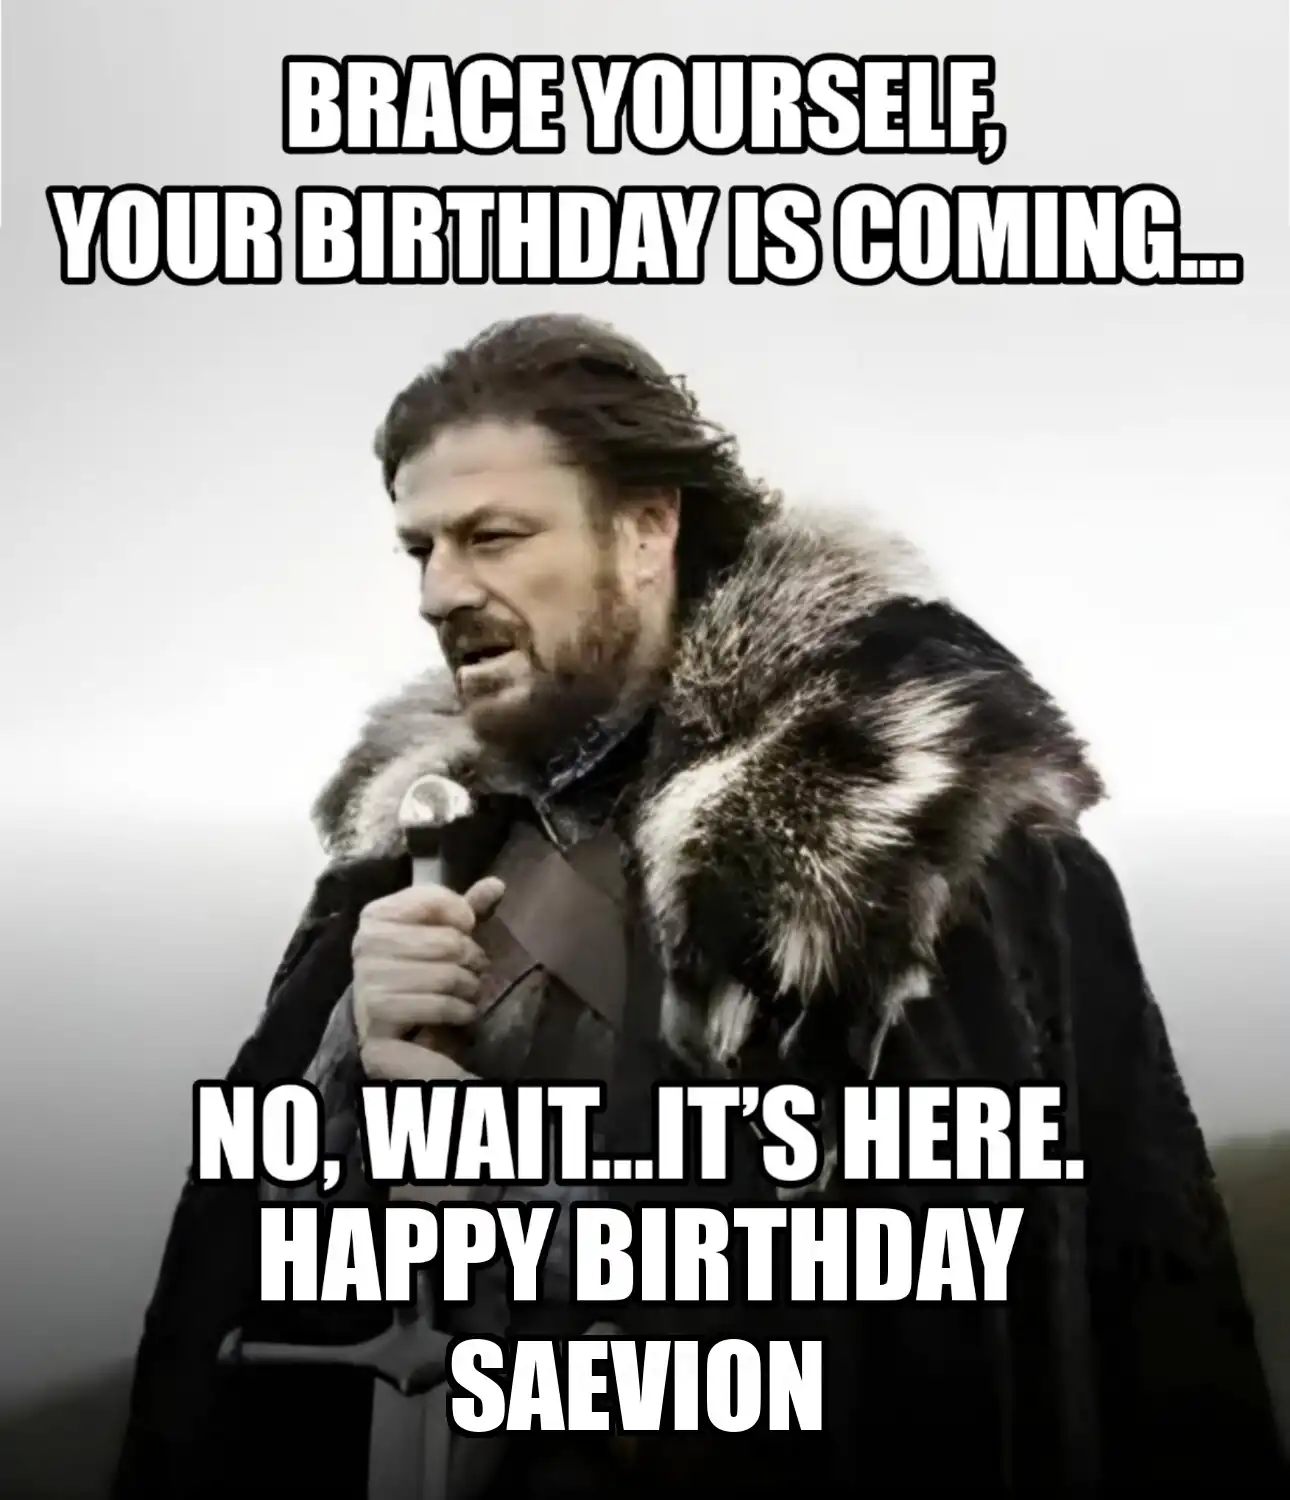 Happy Birthday Saevion Brace Yourself Your Birthday Is Coming Meme